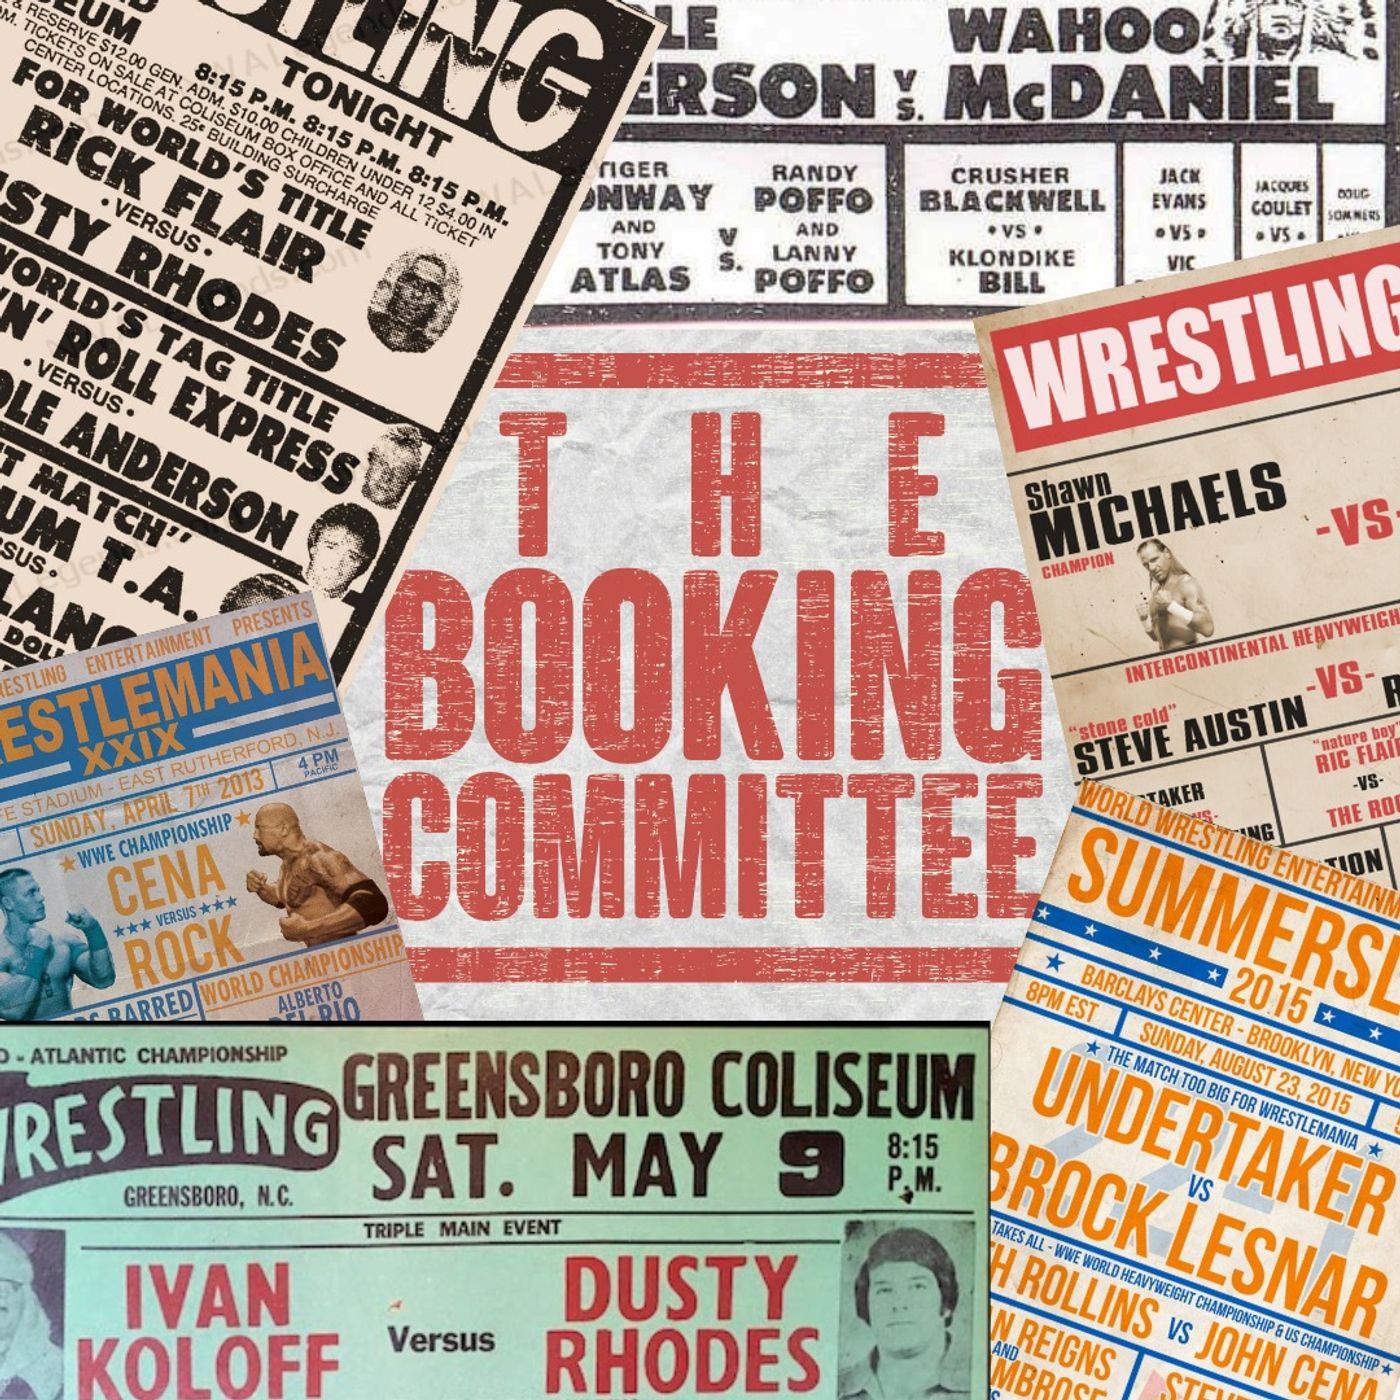 90 Minute Cynic | Wrestling Podcast